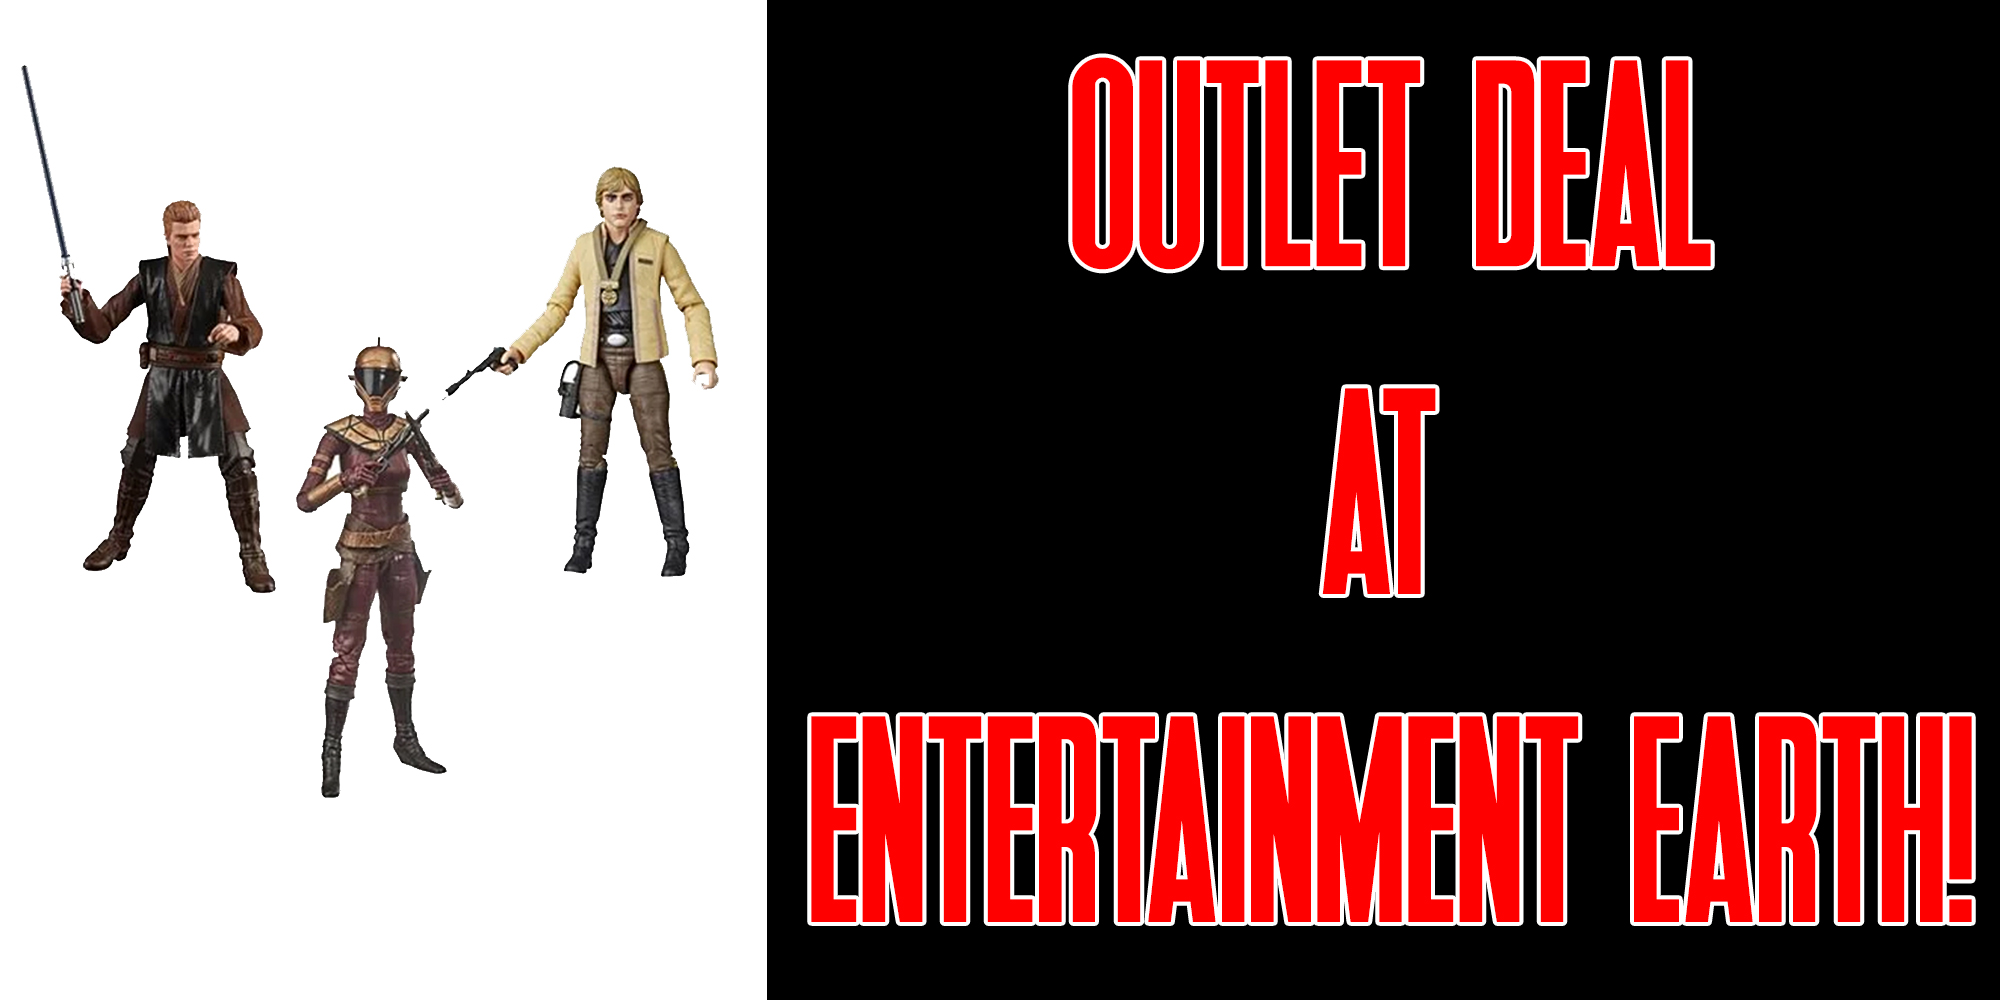 Black Series Outlet Deal At Entertainment Earth!